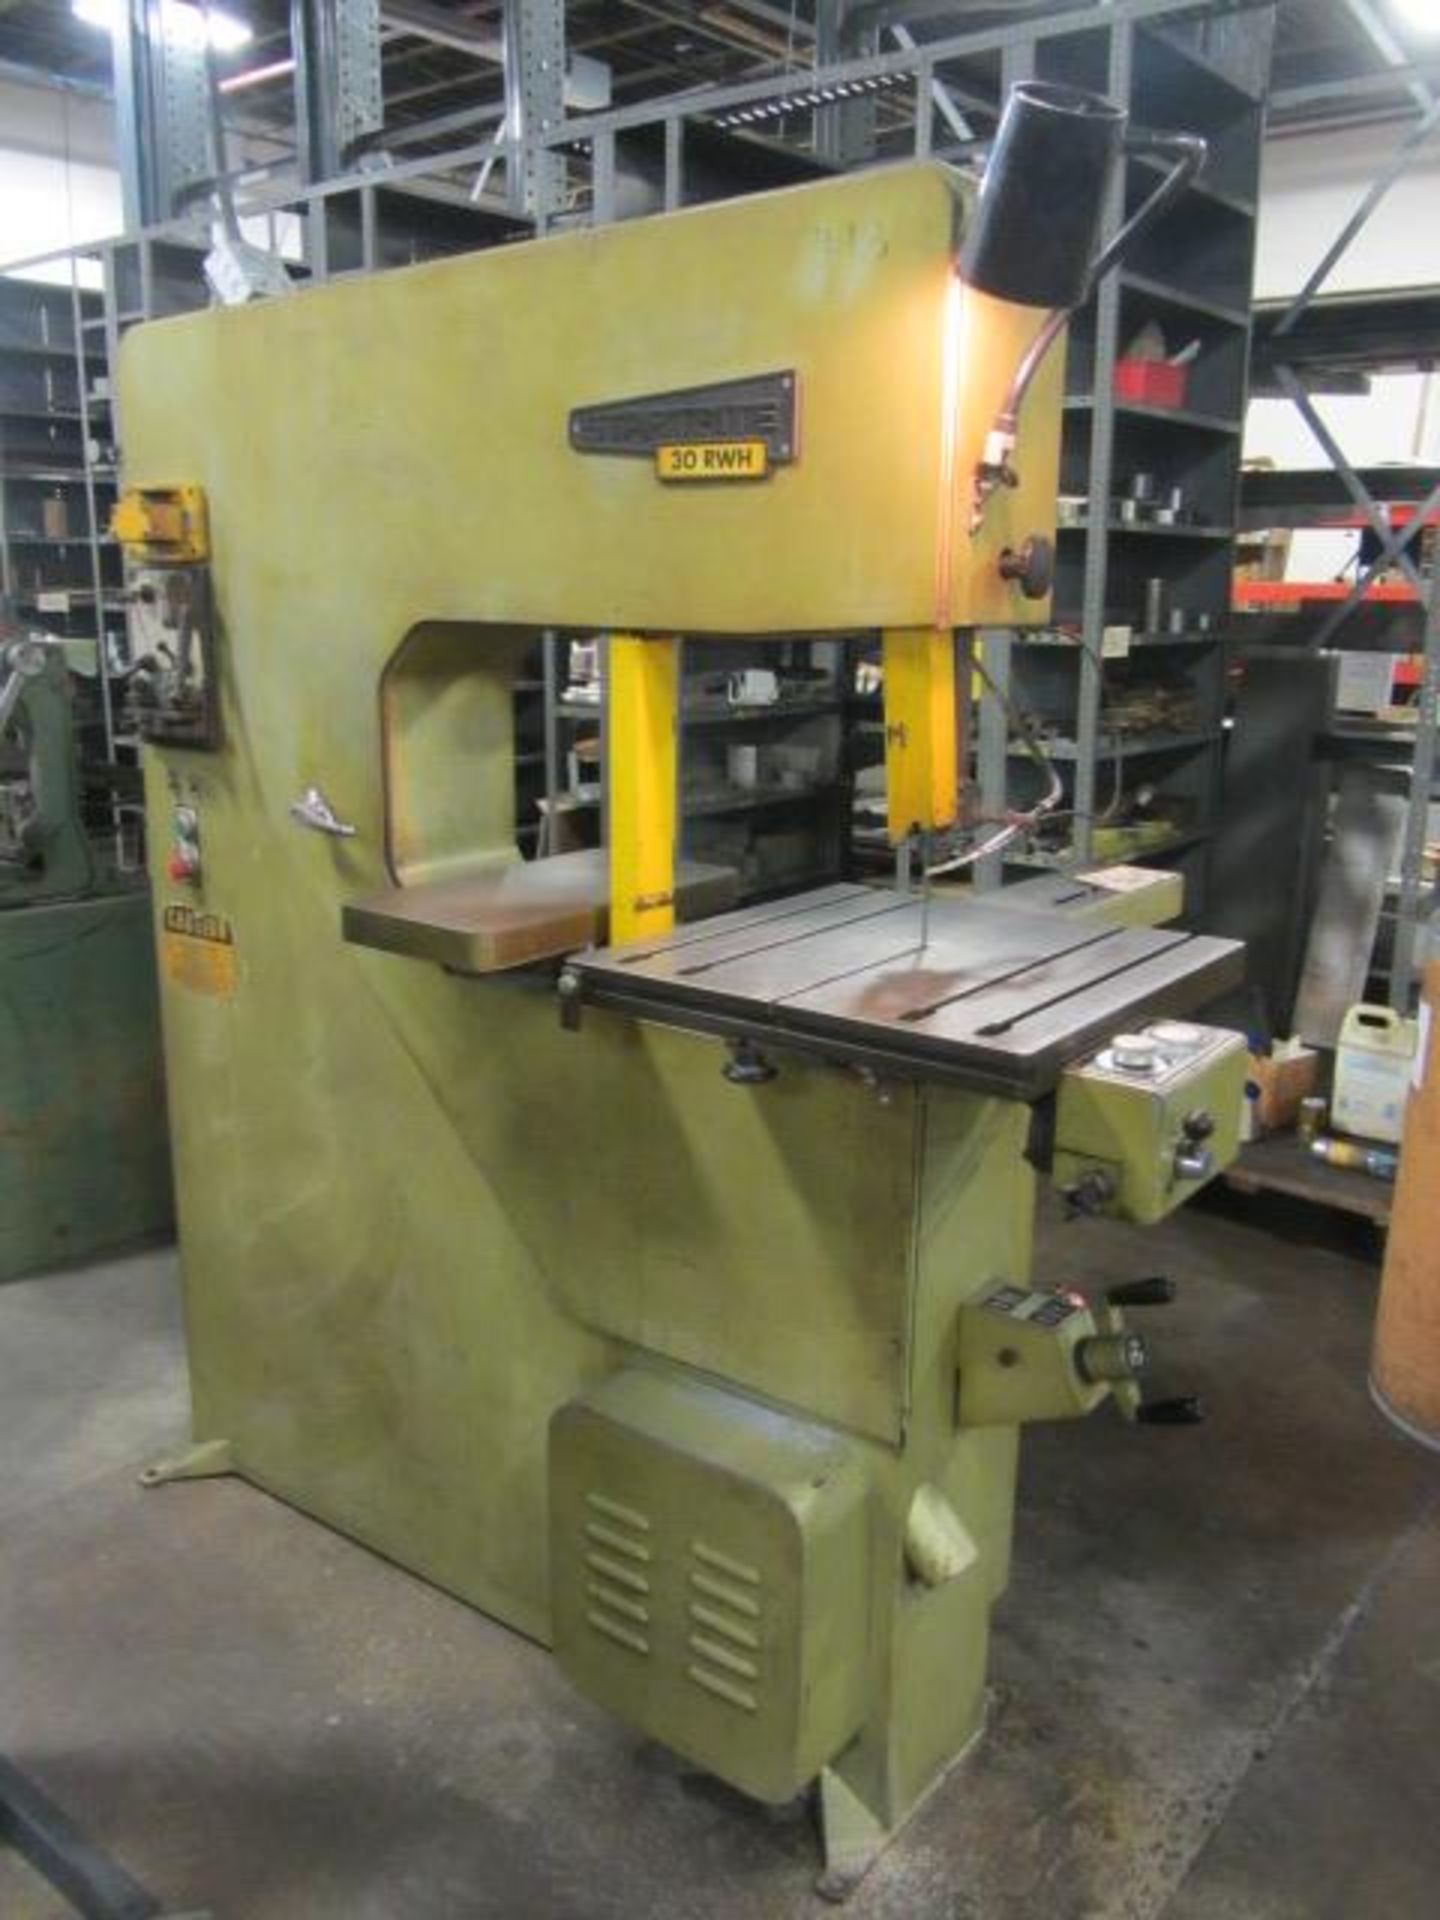 Startrite 30RWH 30'' Vertical Bandsaw with 20'' x 20'' Hydraulic Feed Table, Variable Spindle - Image 4 of 7